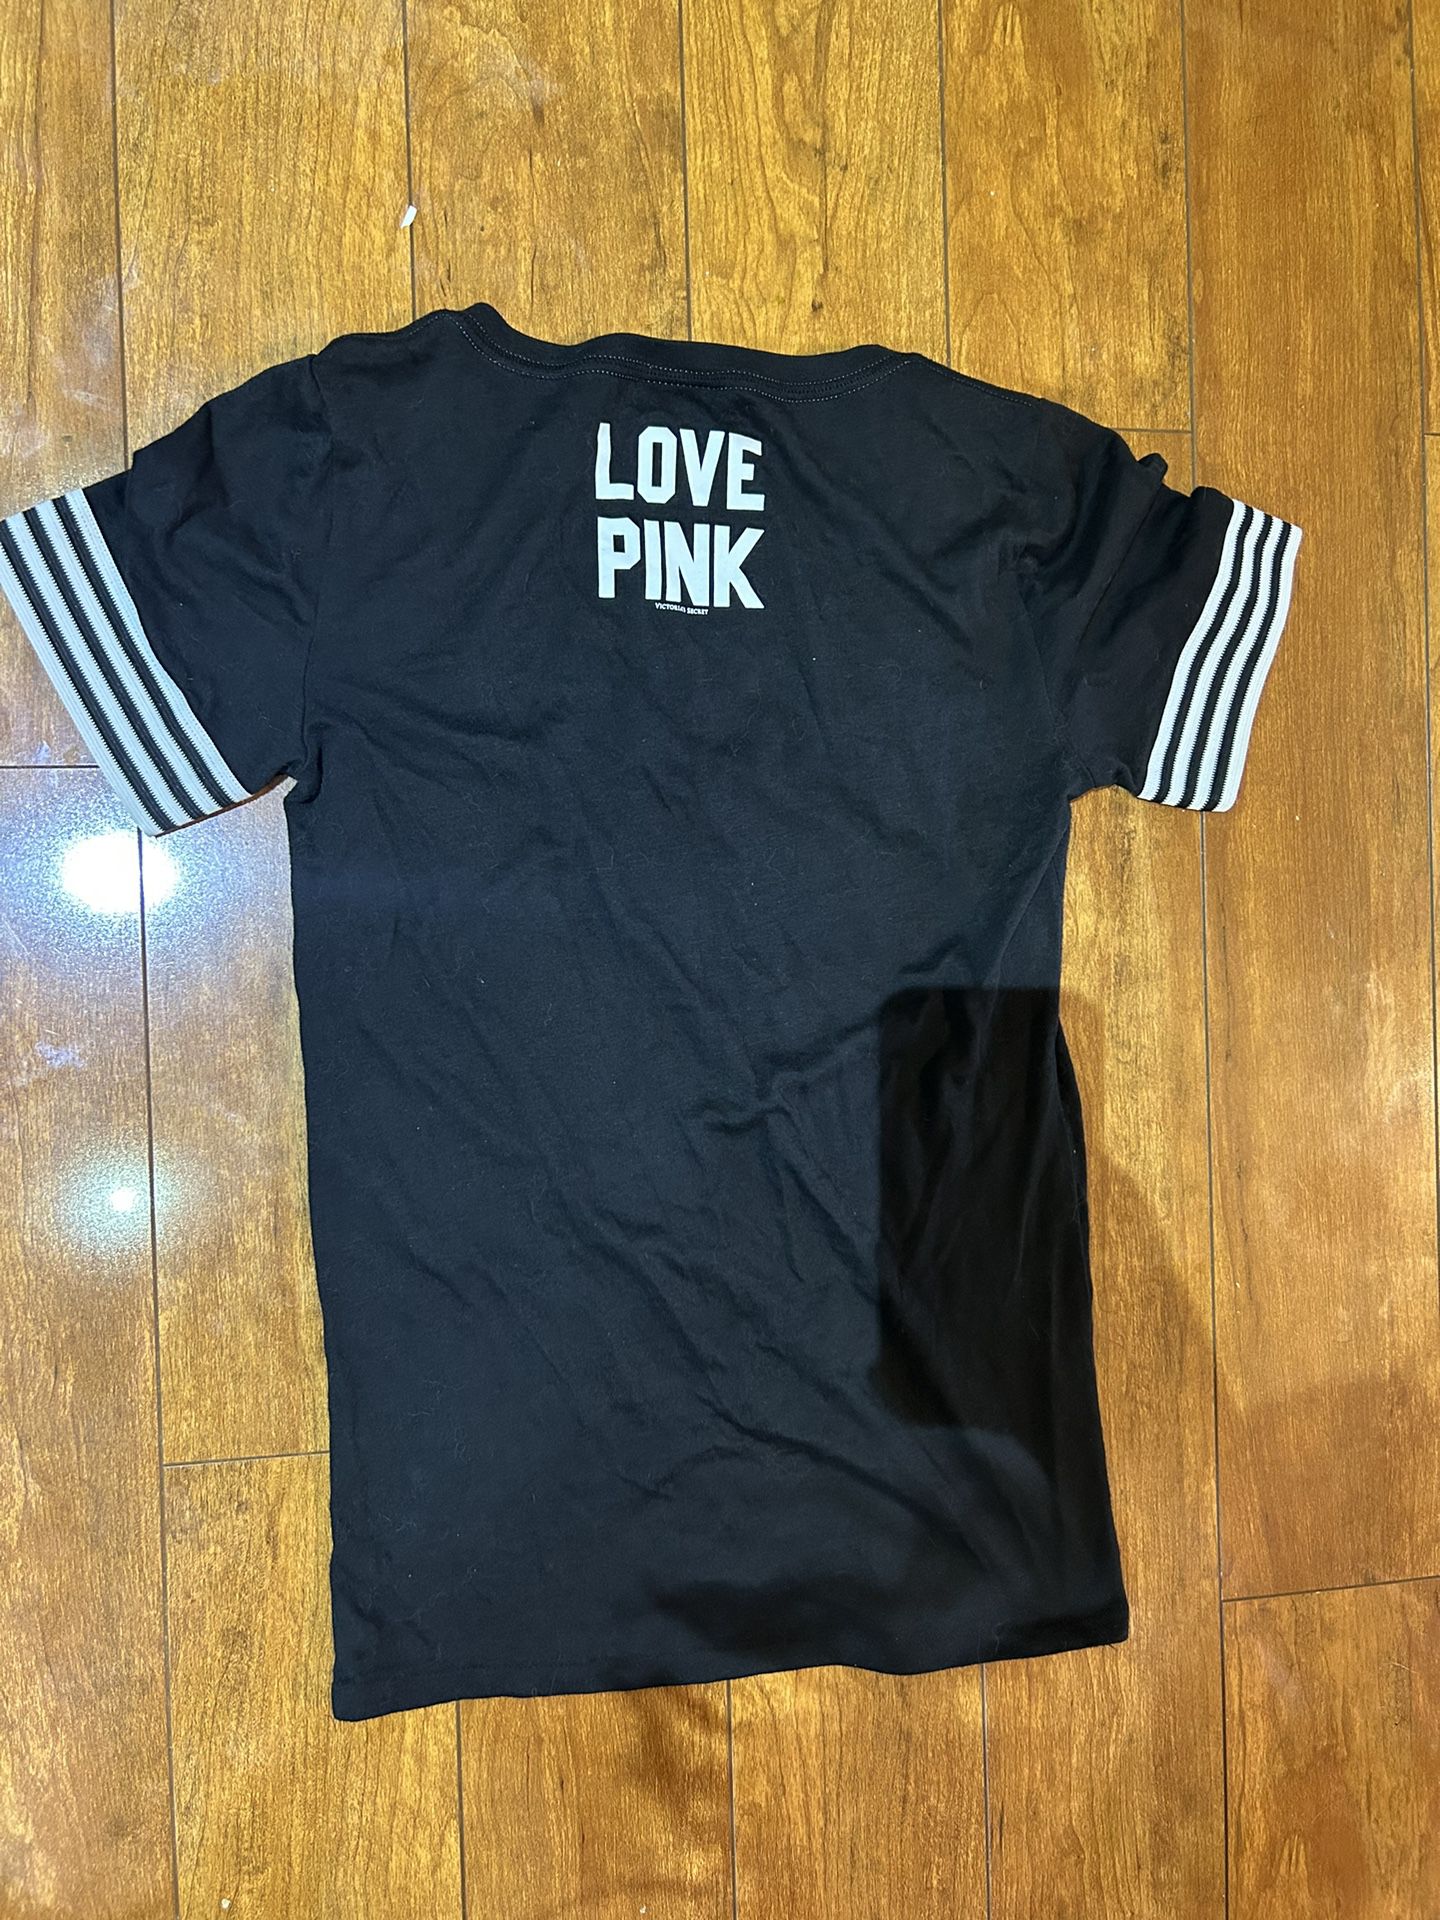 Victoria's Secret PINK Chicago White Sox T Shirt small for Sale in  Schaumburg, IL - OfferUp